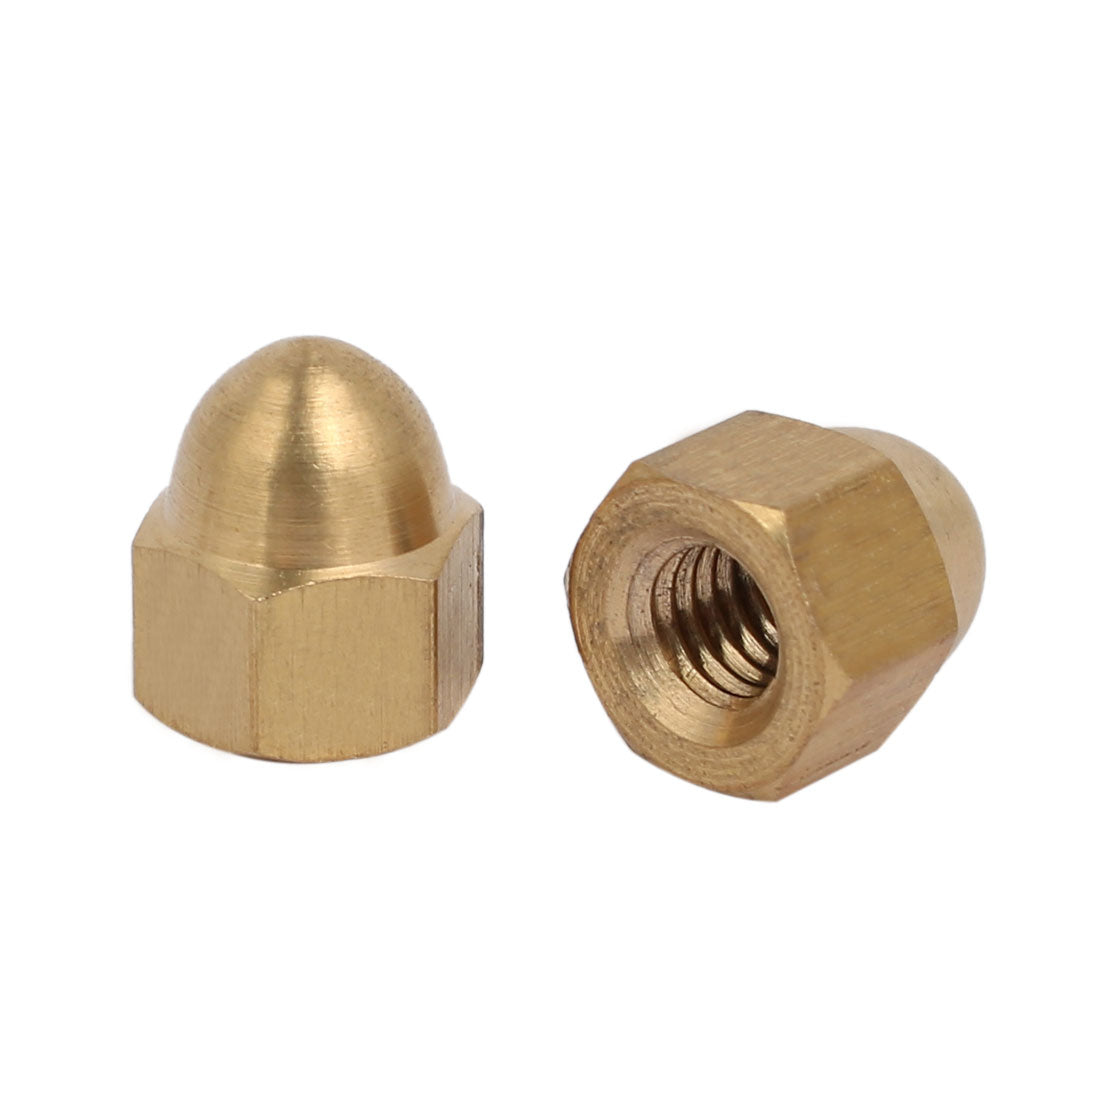 uxcell Uxcell 5pcs M6 Female Thread Nut DIN1587 Dome Cap Head Hex Brass Tone